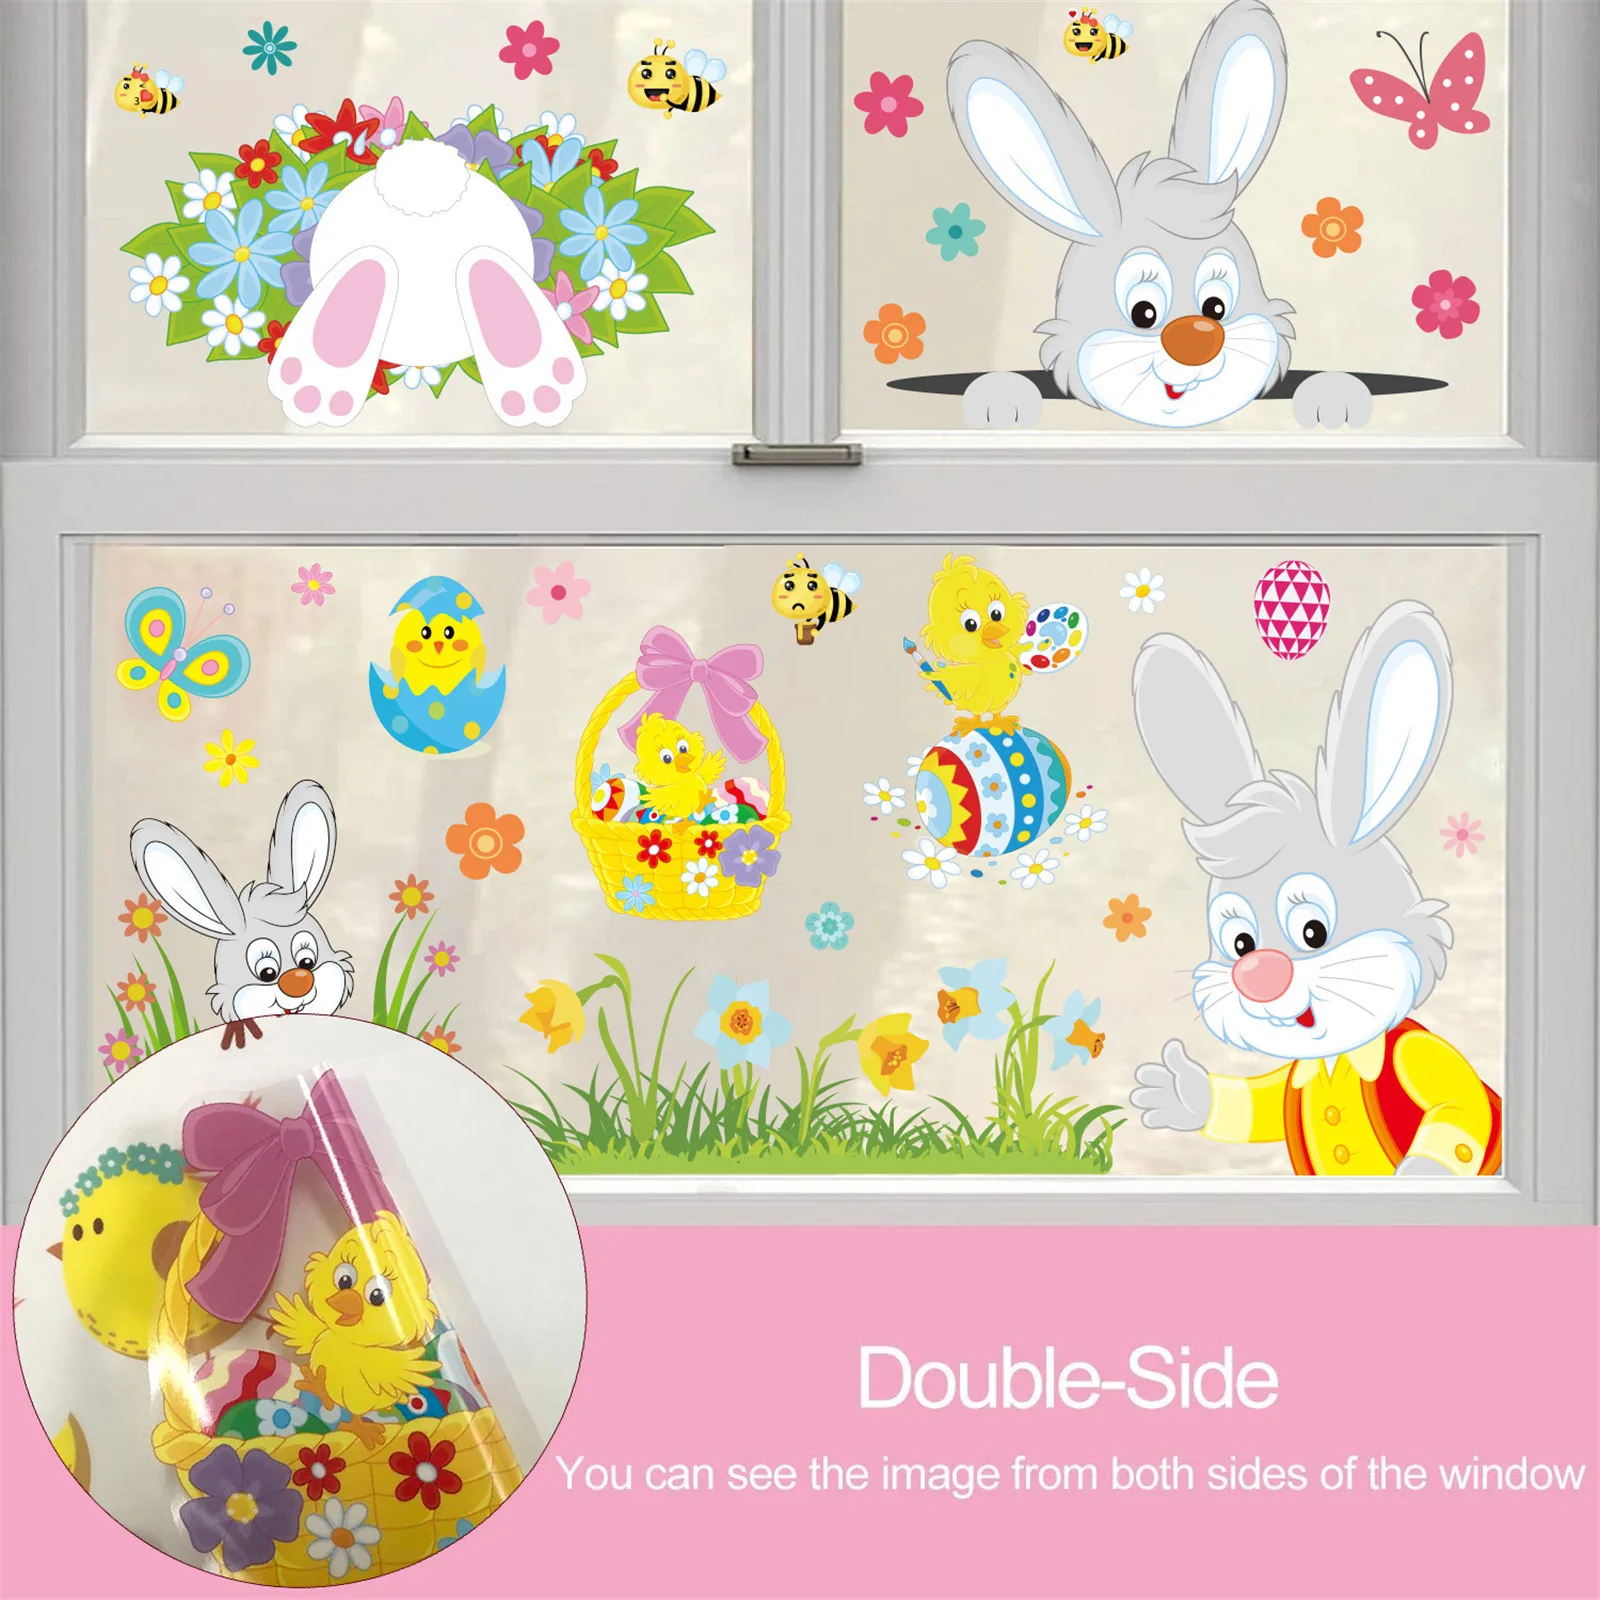 Details about   Little chic Easter window stickersEaster window stickersEaster decor 